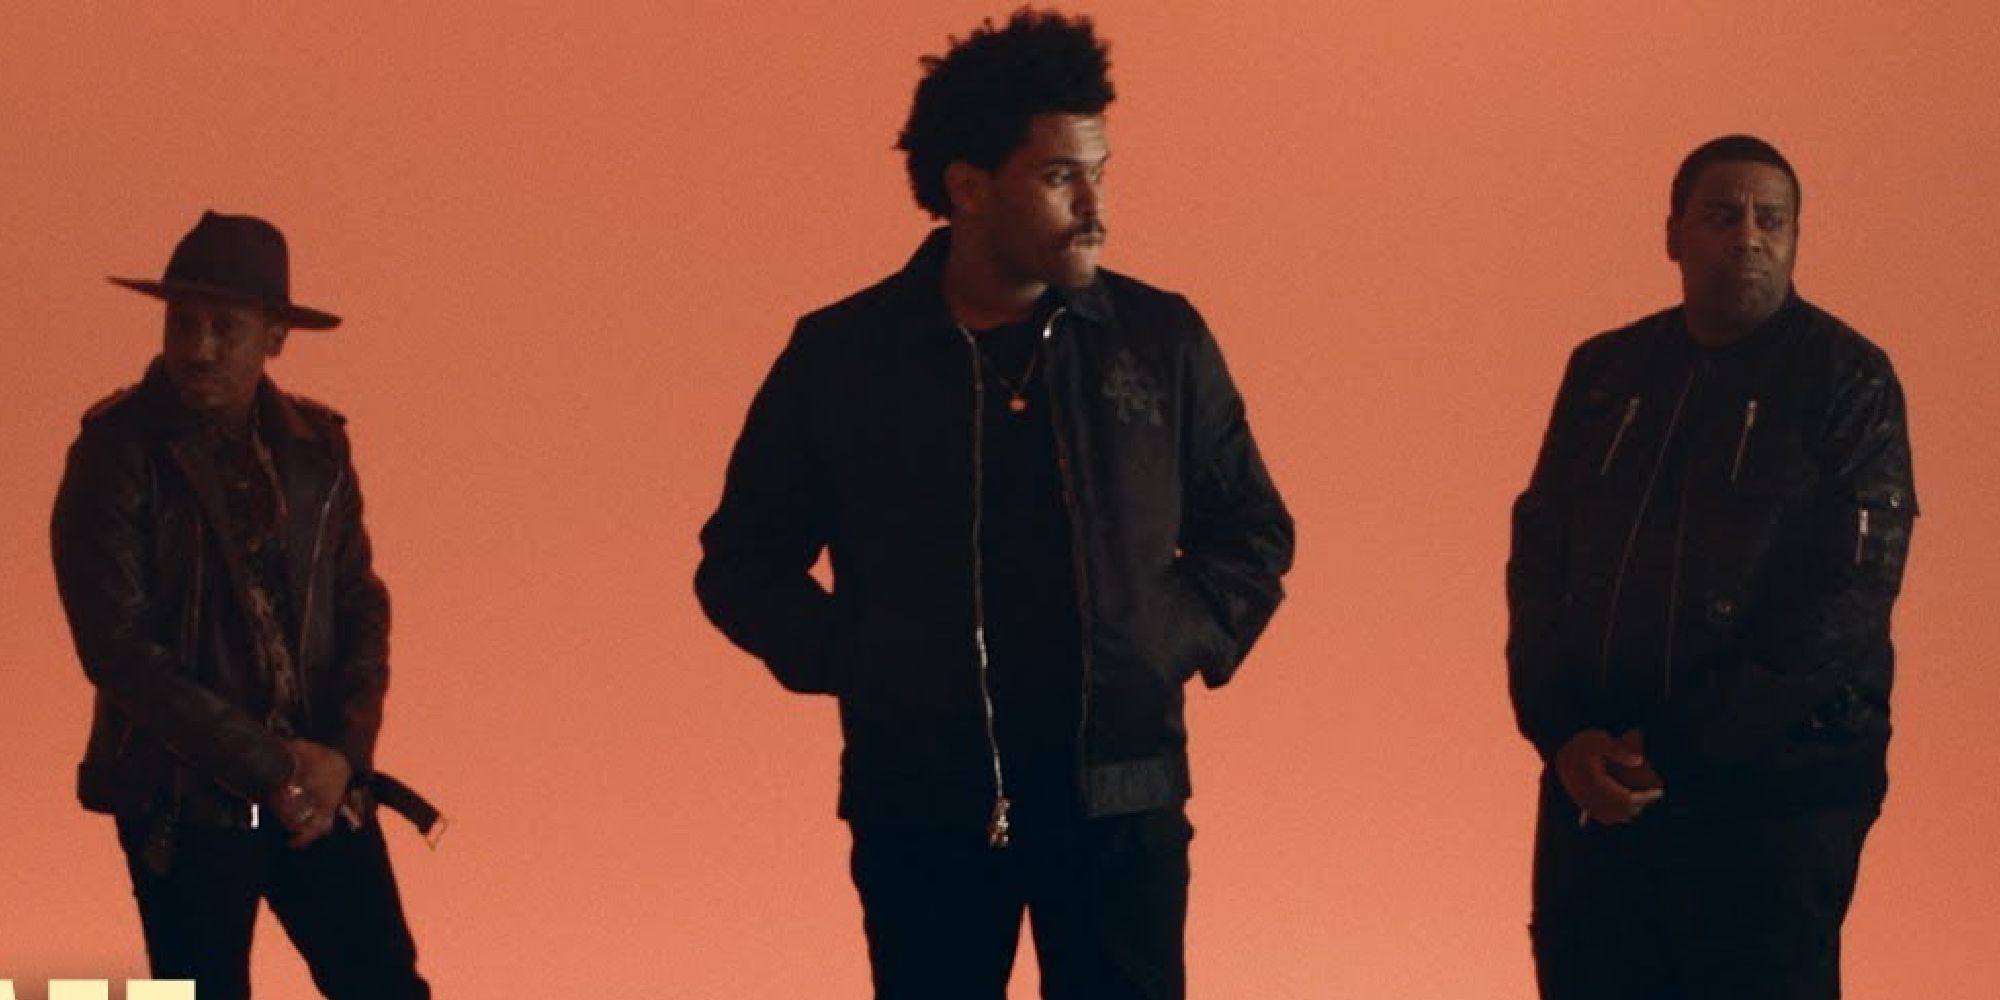 Chris Redd, The Weeknd, and Kenan Thompson on an orange background